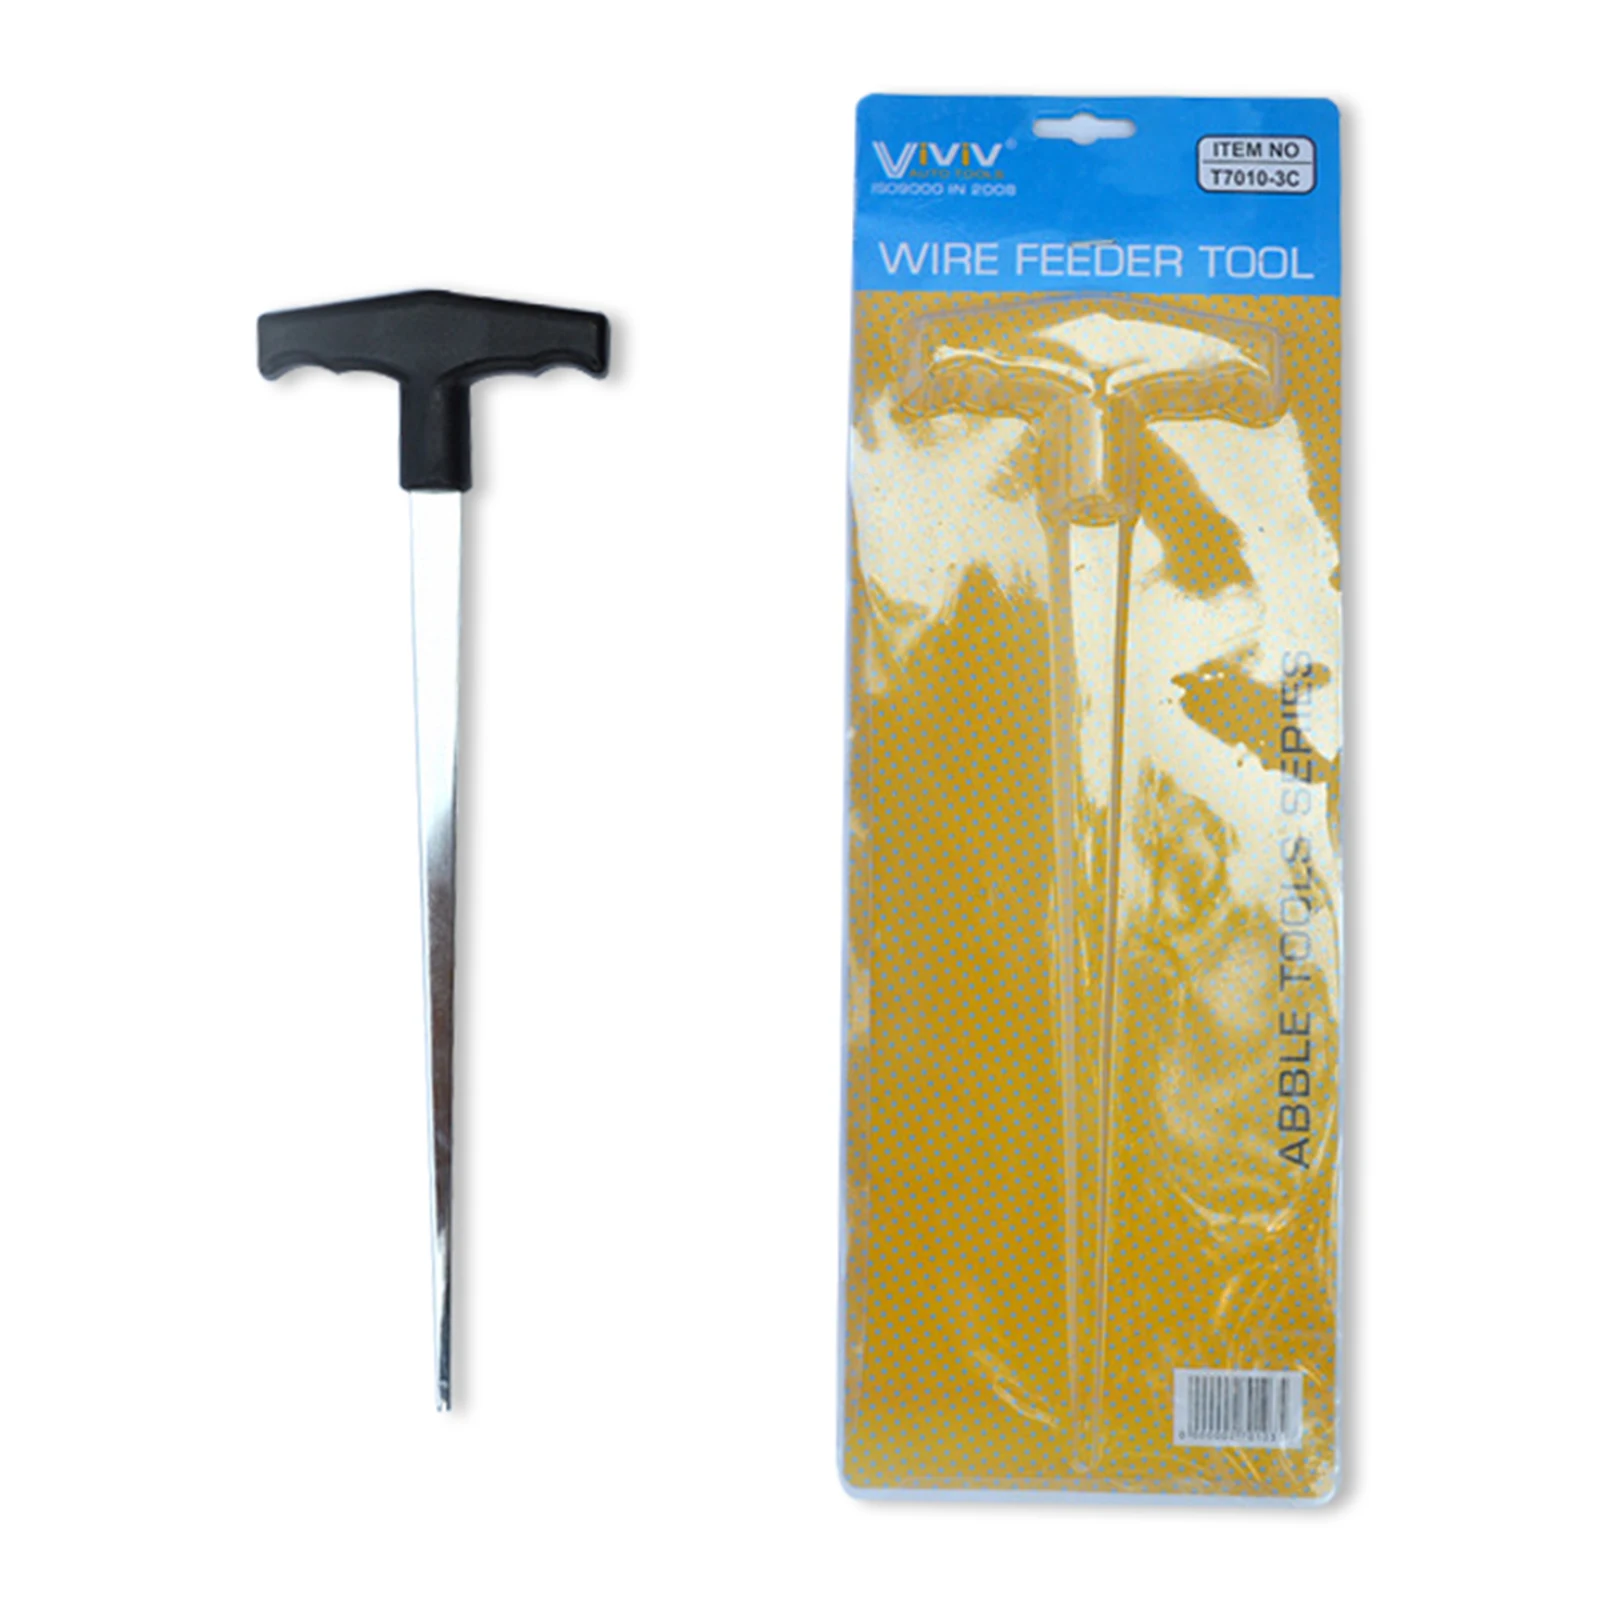 Glass Windshield Remover Lightweight Removing For Repair Hand Tool Car C... - $18.92